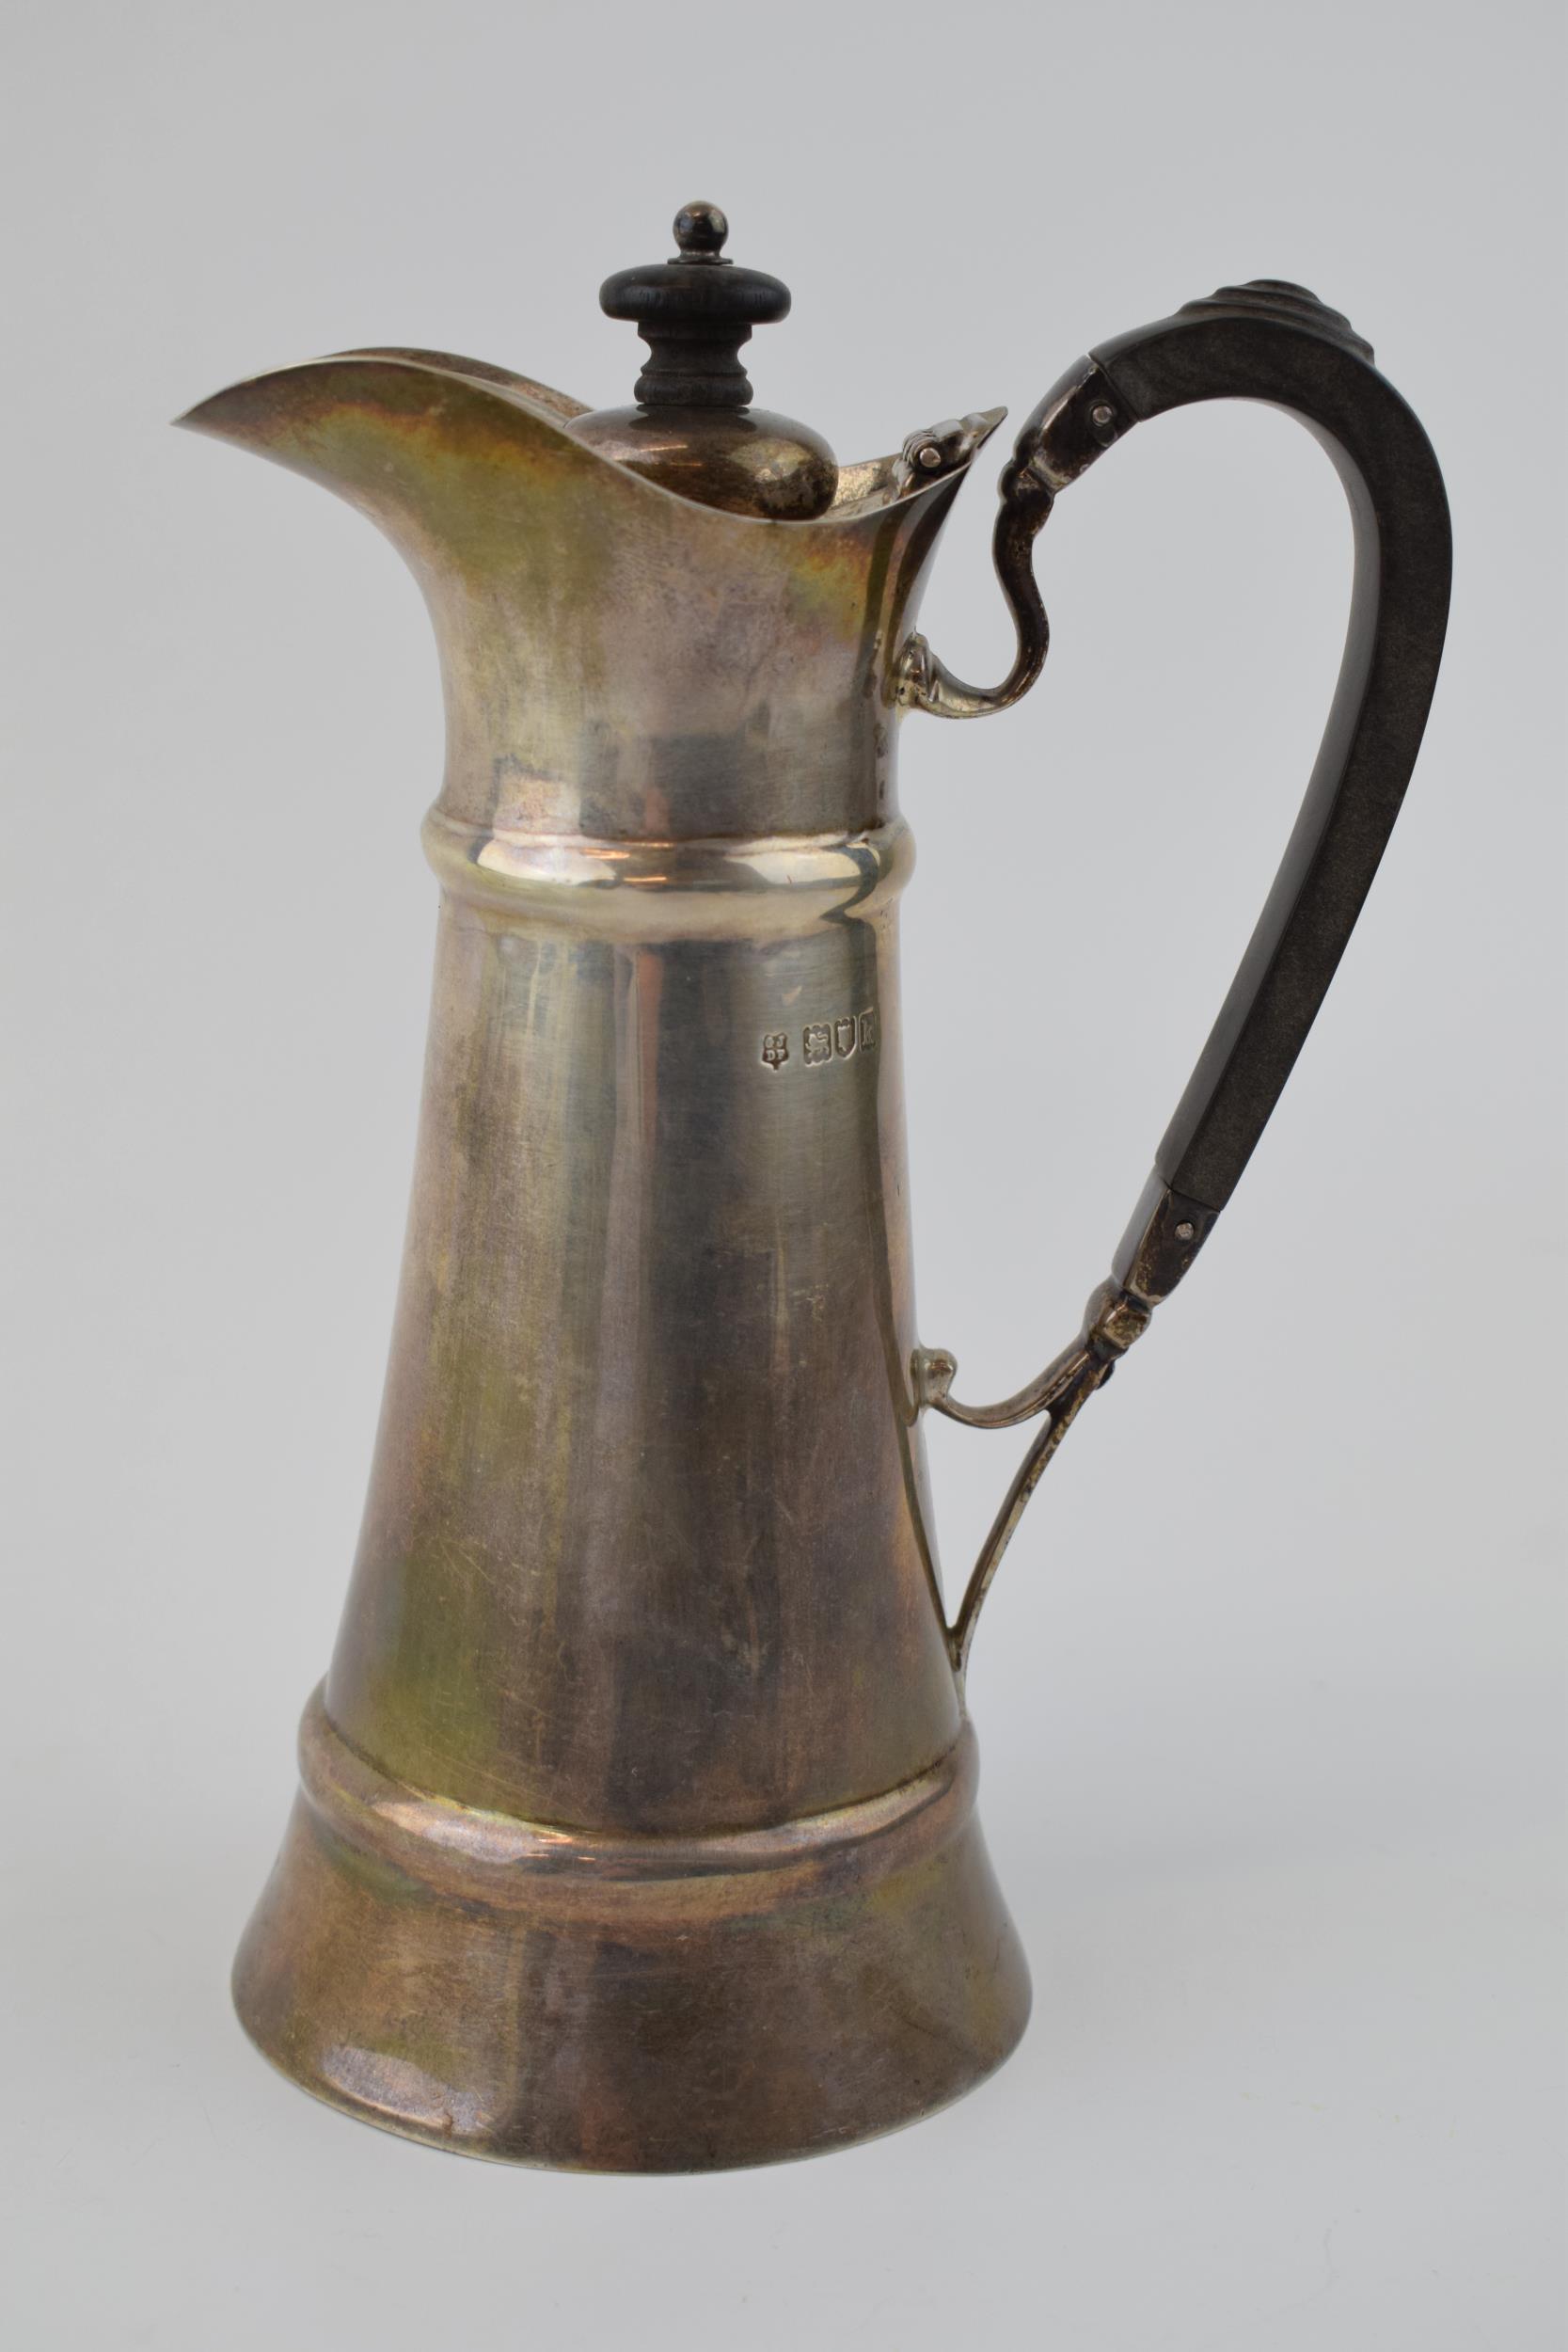 Hallmarked silver Art Nouveau hot water jug, 292.6 grams, with ebonised handle and finial, London - Image 2 of 4